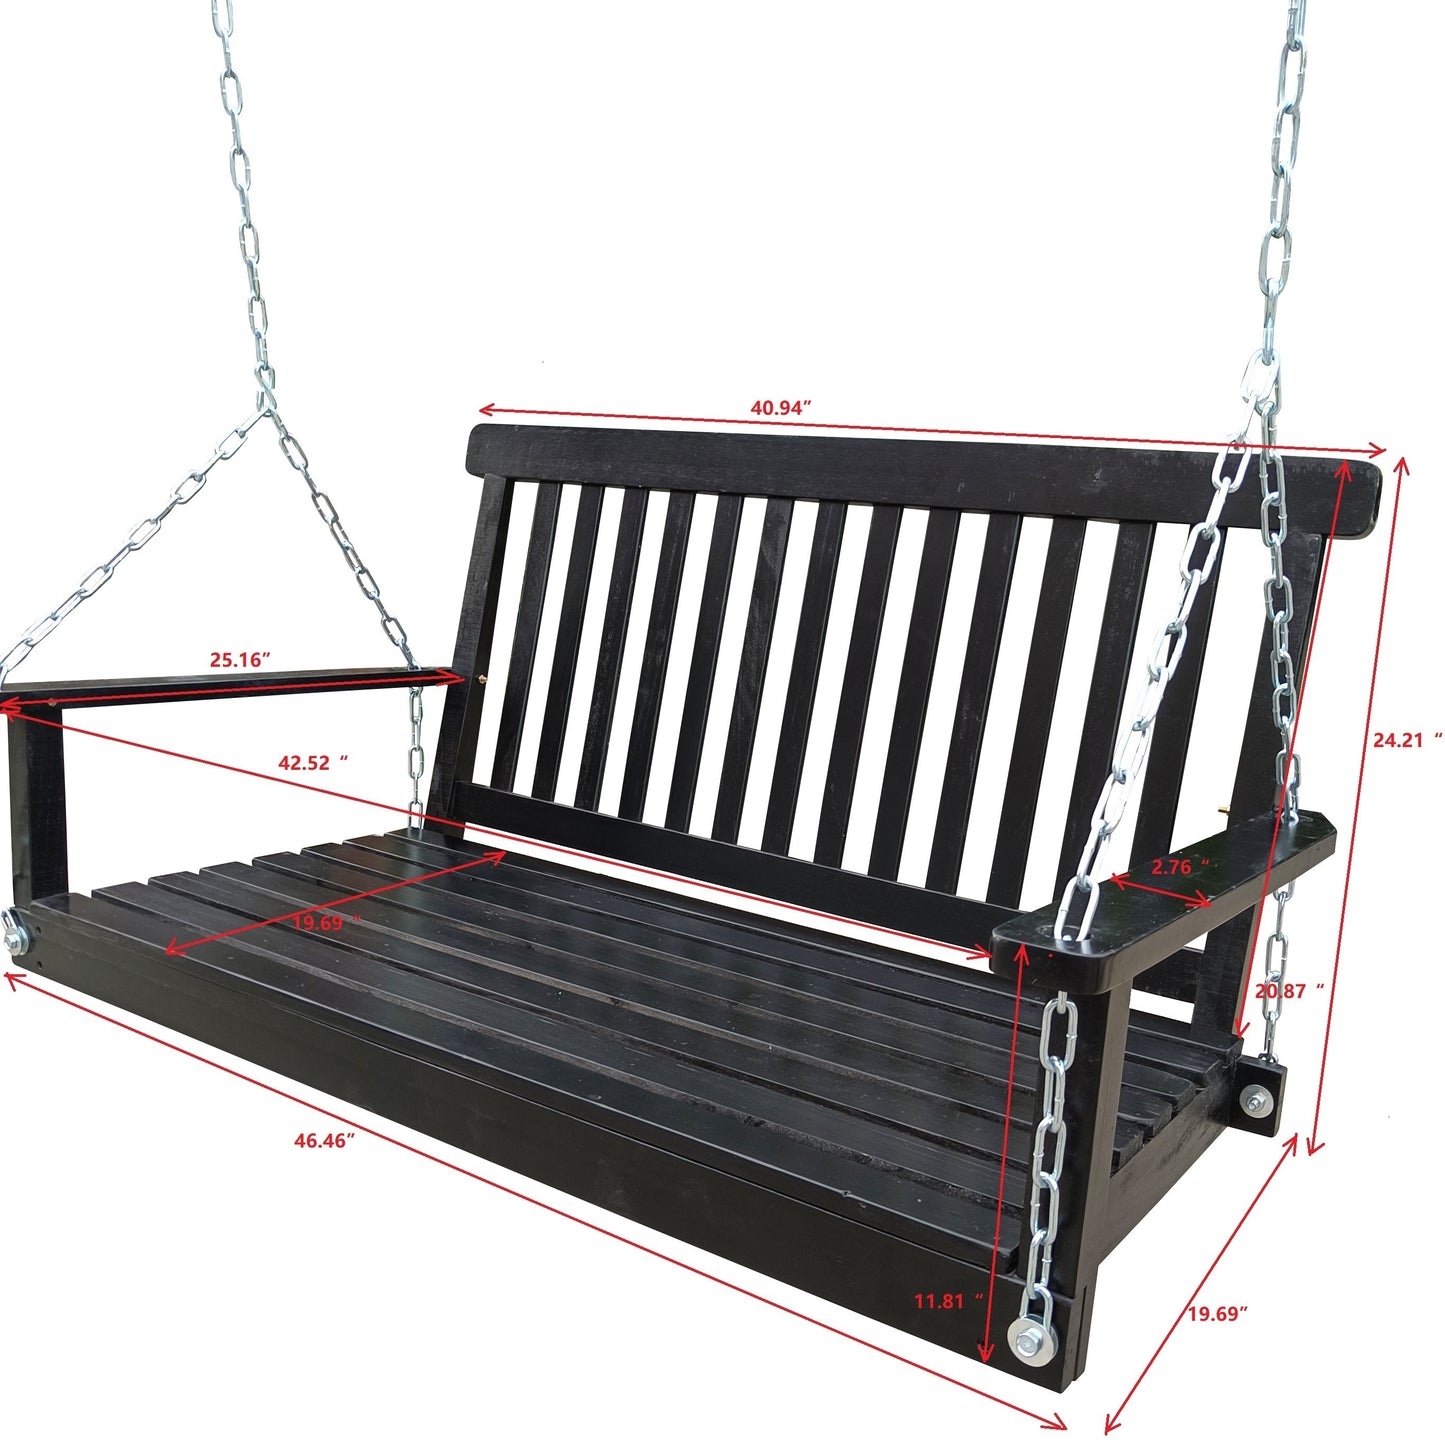 Front Porch Swing with Armrests, Wood Bench Swing with Hanging Chains,for Outdoor Patio ,Garden Yard, porch, backyard,  or sunroom,Easy to Assemble,black